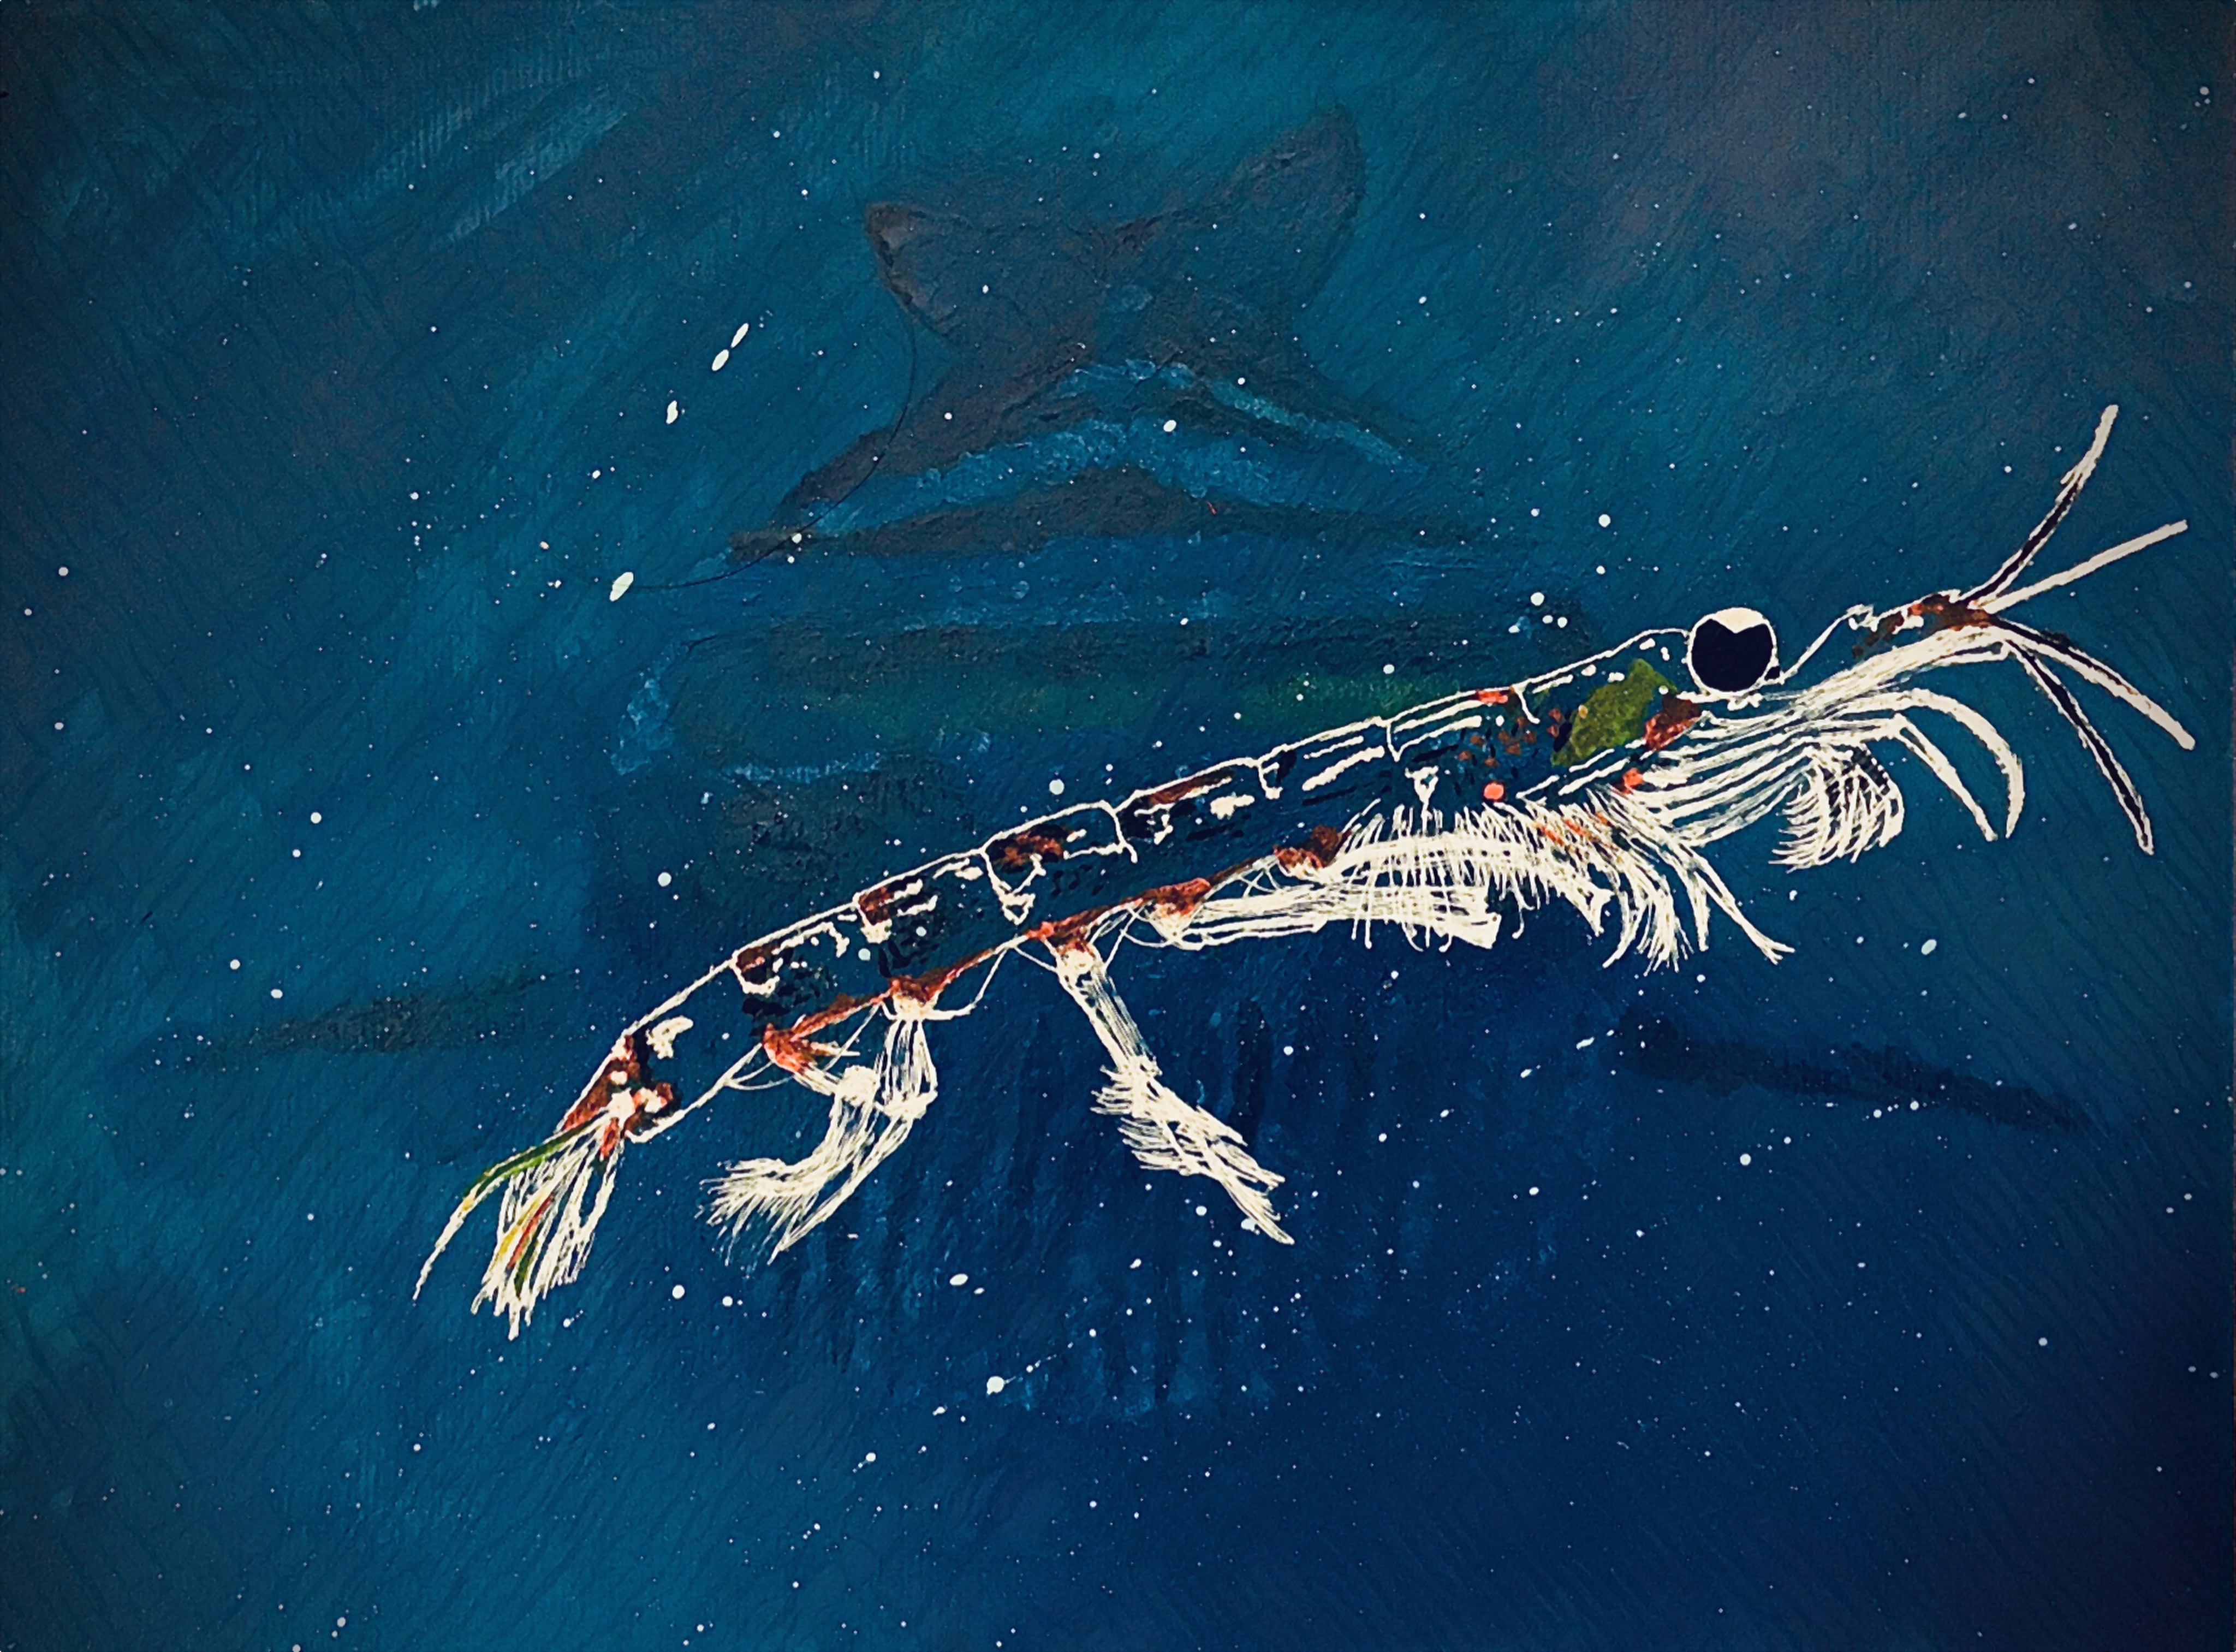 Painting of a krill outlined in white against a dark background. The faint silhouette of a baleen whale opening its mouth emerges from the background. 